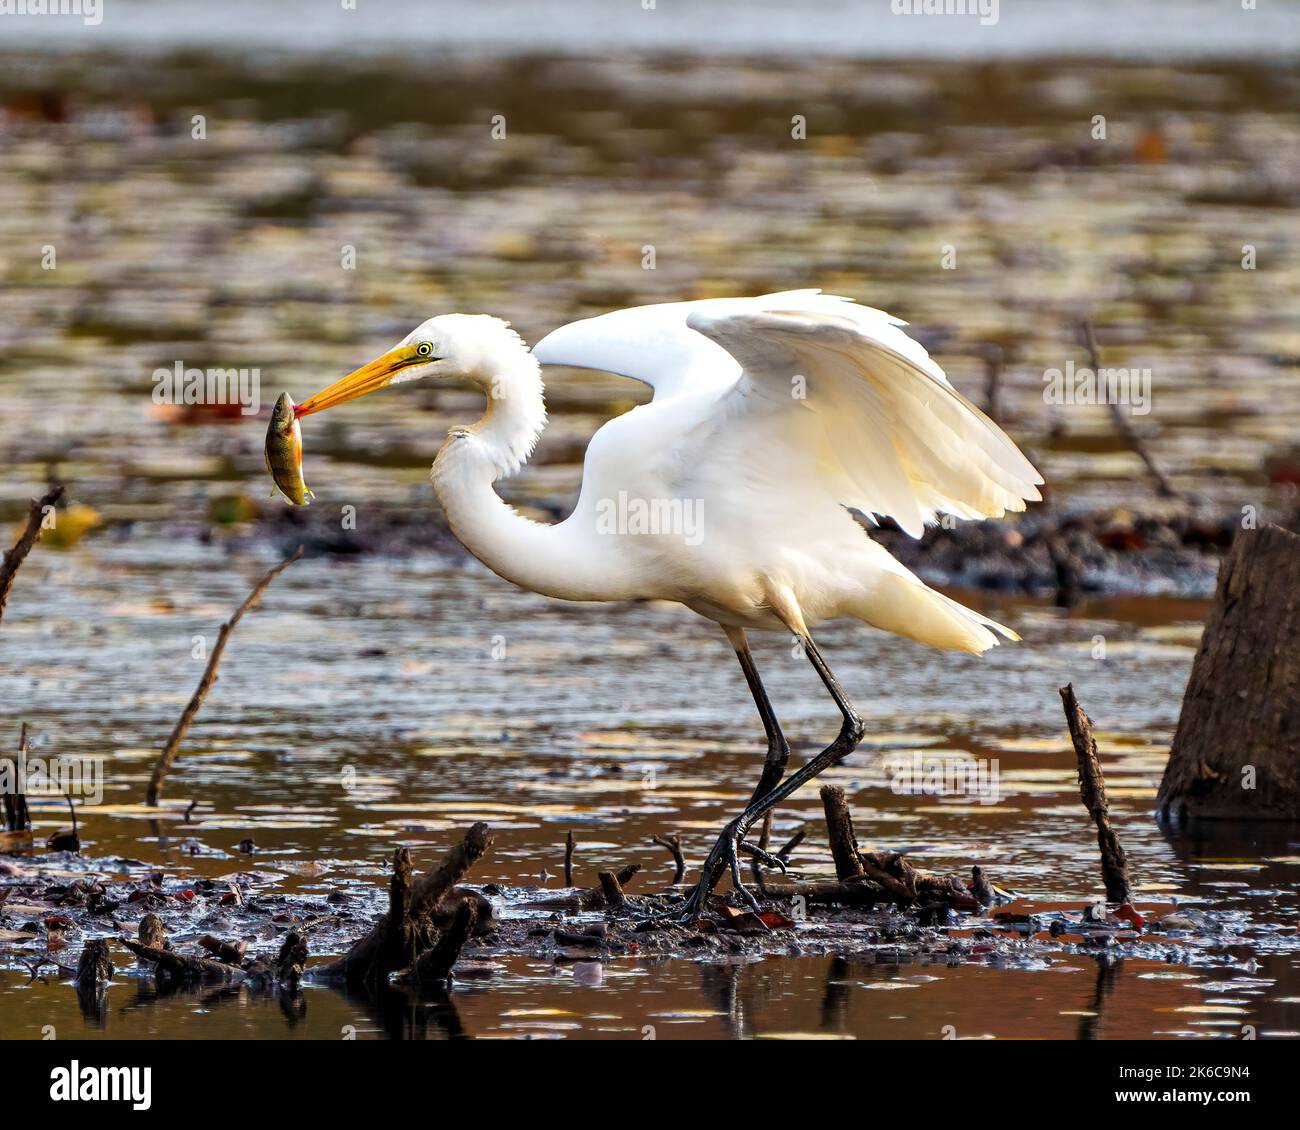 Great White Egret close-up profile side view with a fish in its beak in shallow water with foliage background in its environment and wetland habitat. Stock Photo